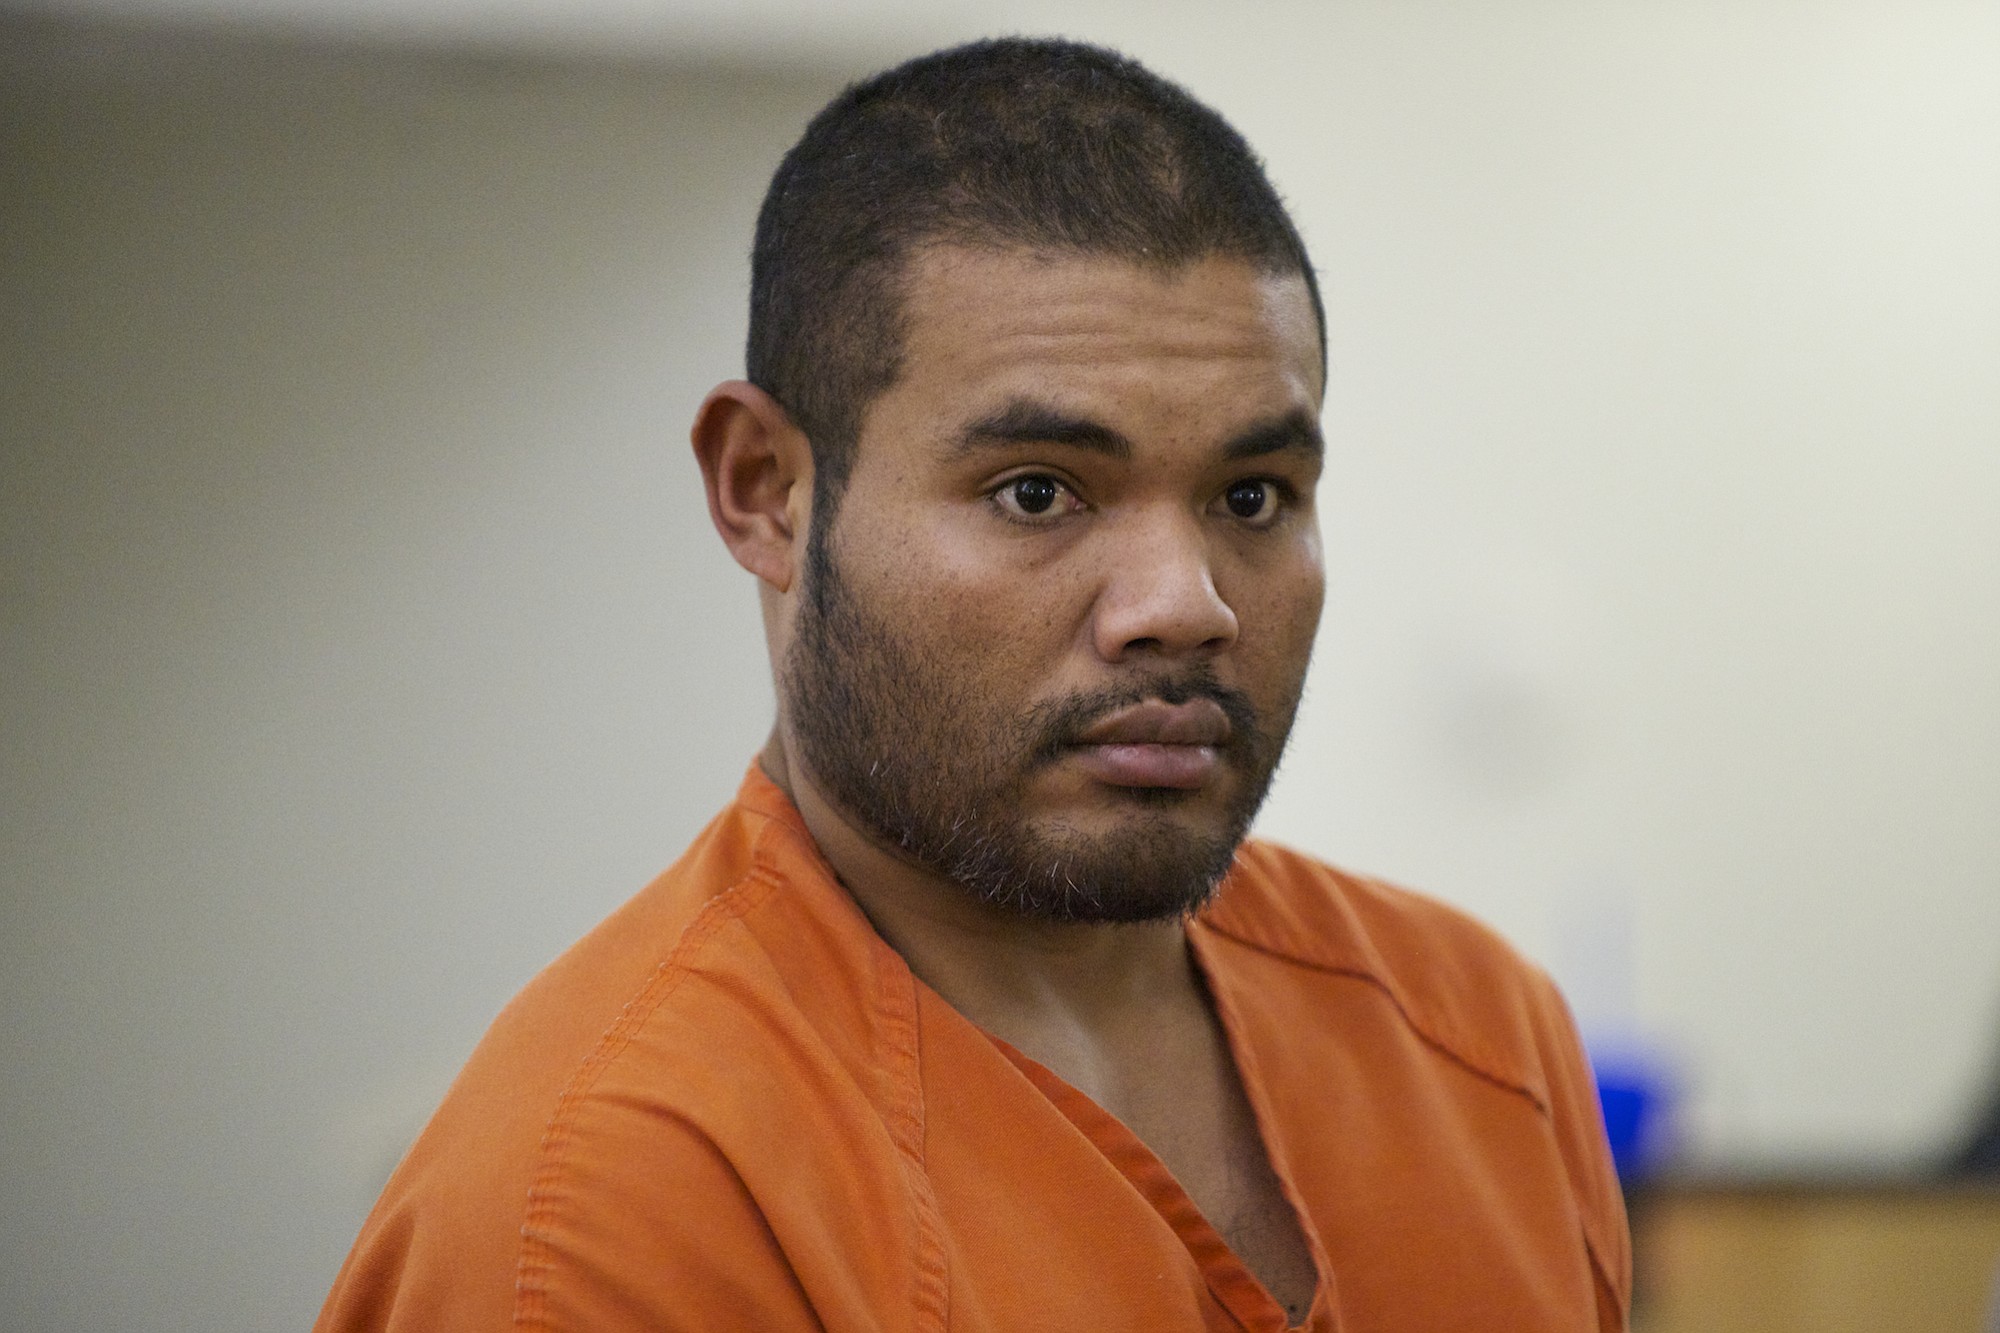 McQuay Postol, 31, of Portland is arraigned in Clark County Superior Court on June 13 on two counts of first-degree attempted murder and other charges.